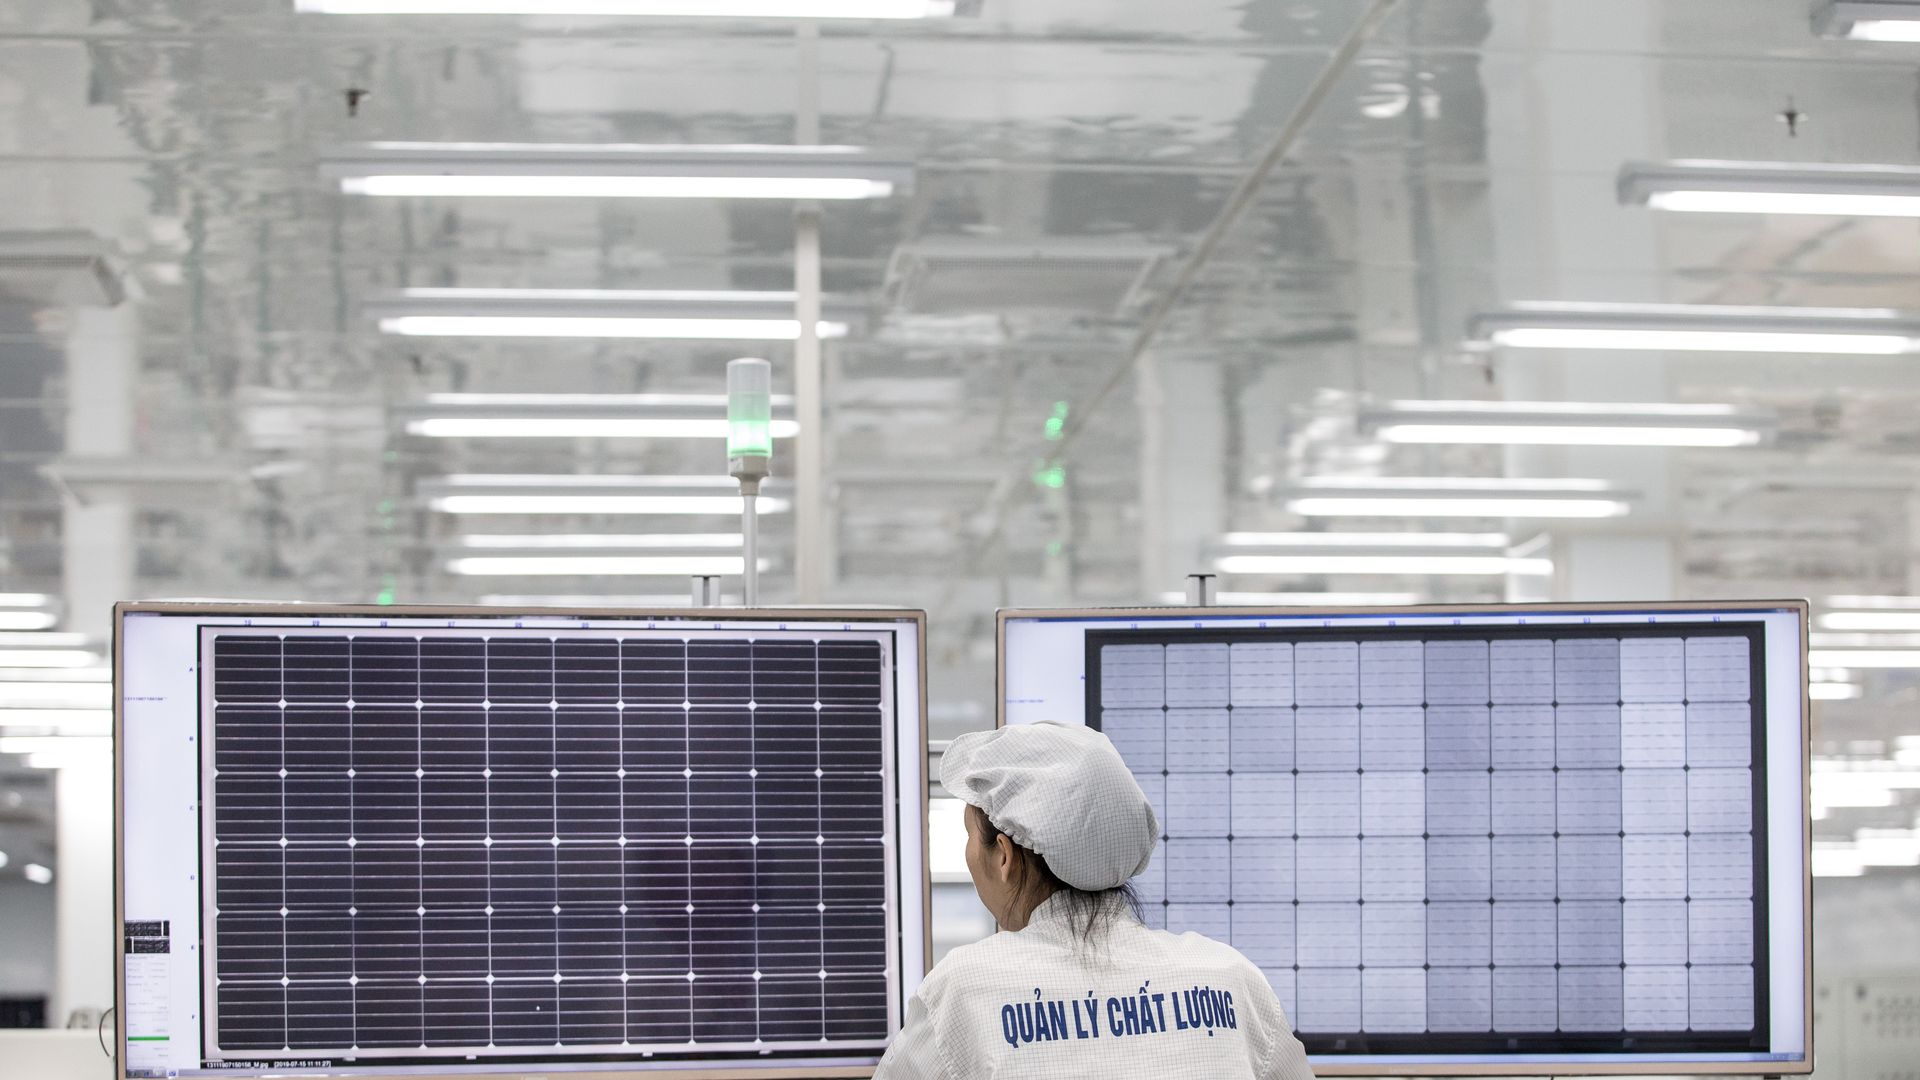 Worker at Vietnam solar factory inspects panels